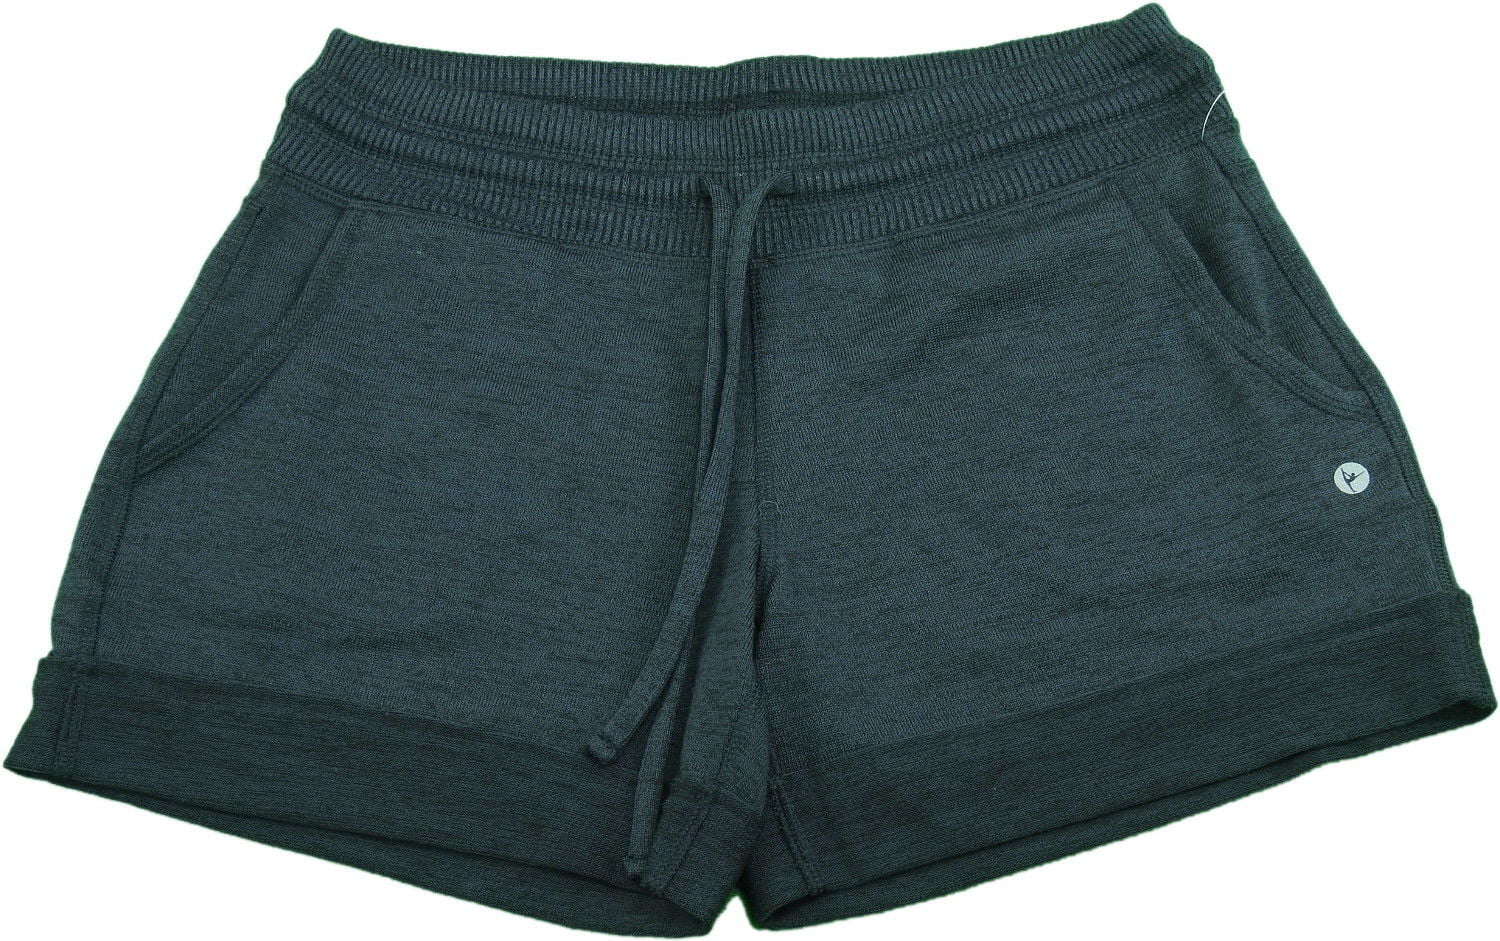 NEW Womens ACTIVE LIFE Deep Charcoal Exercise Lounge Knit Shorts Size M Medium 